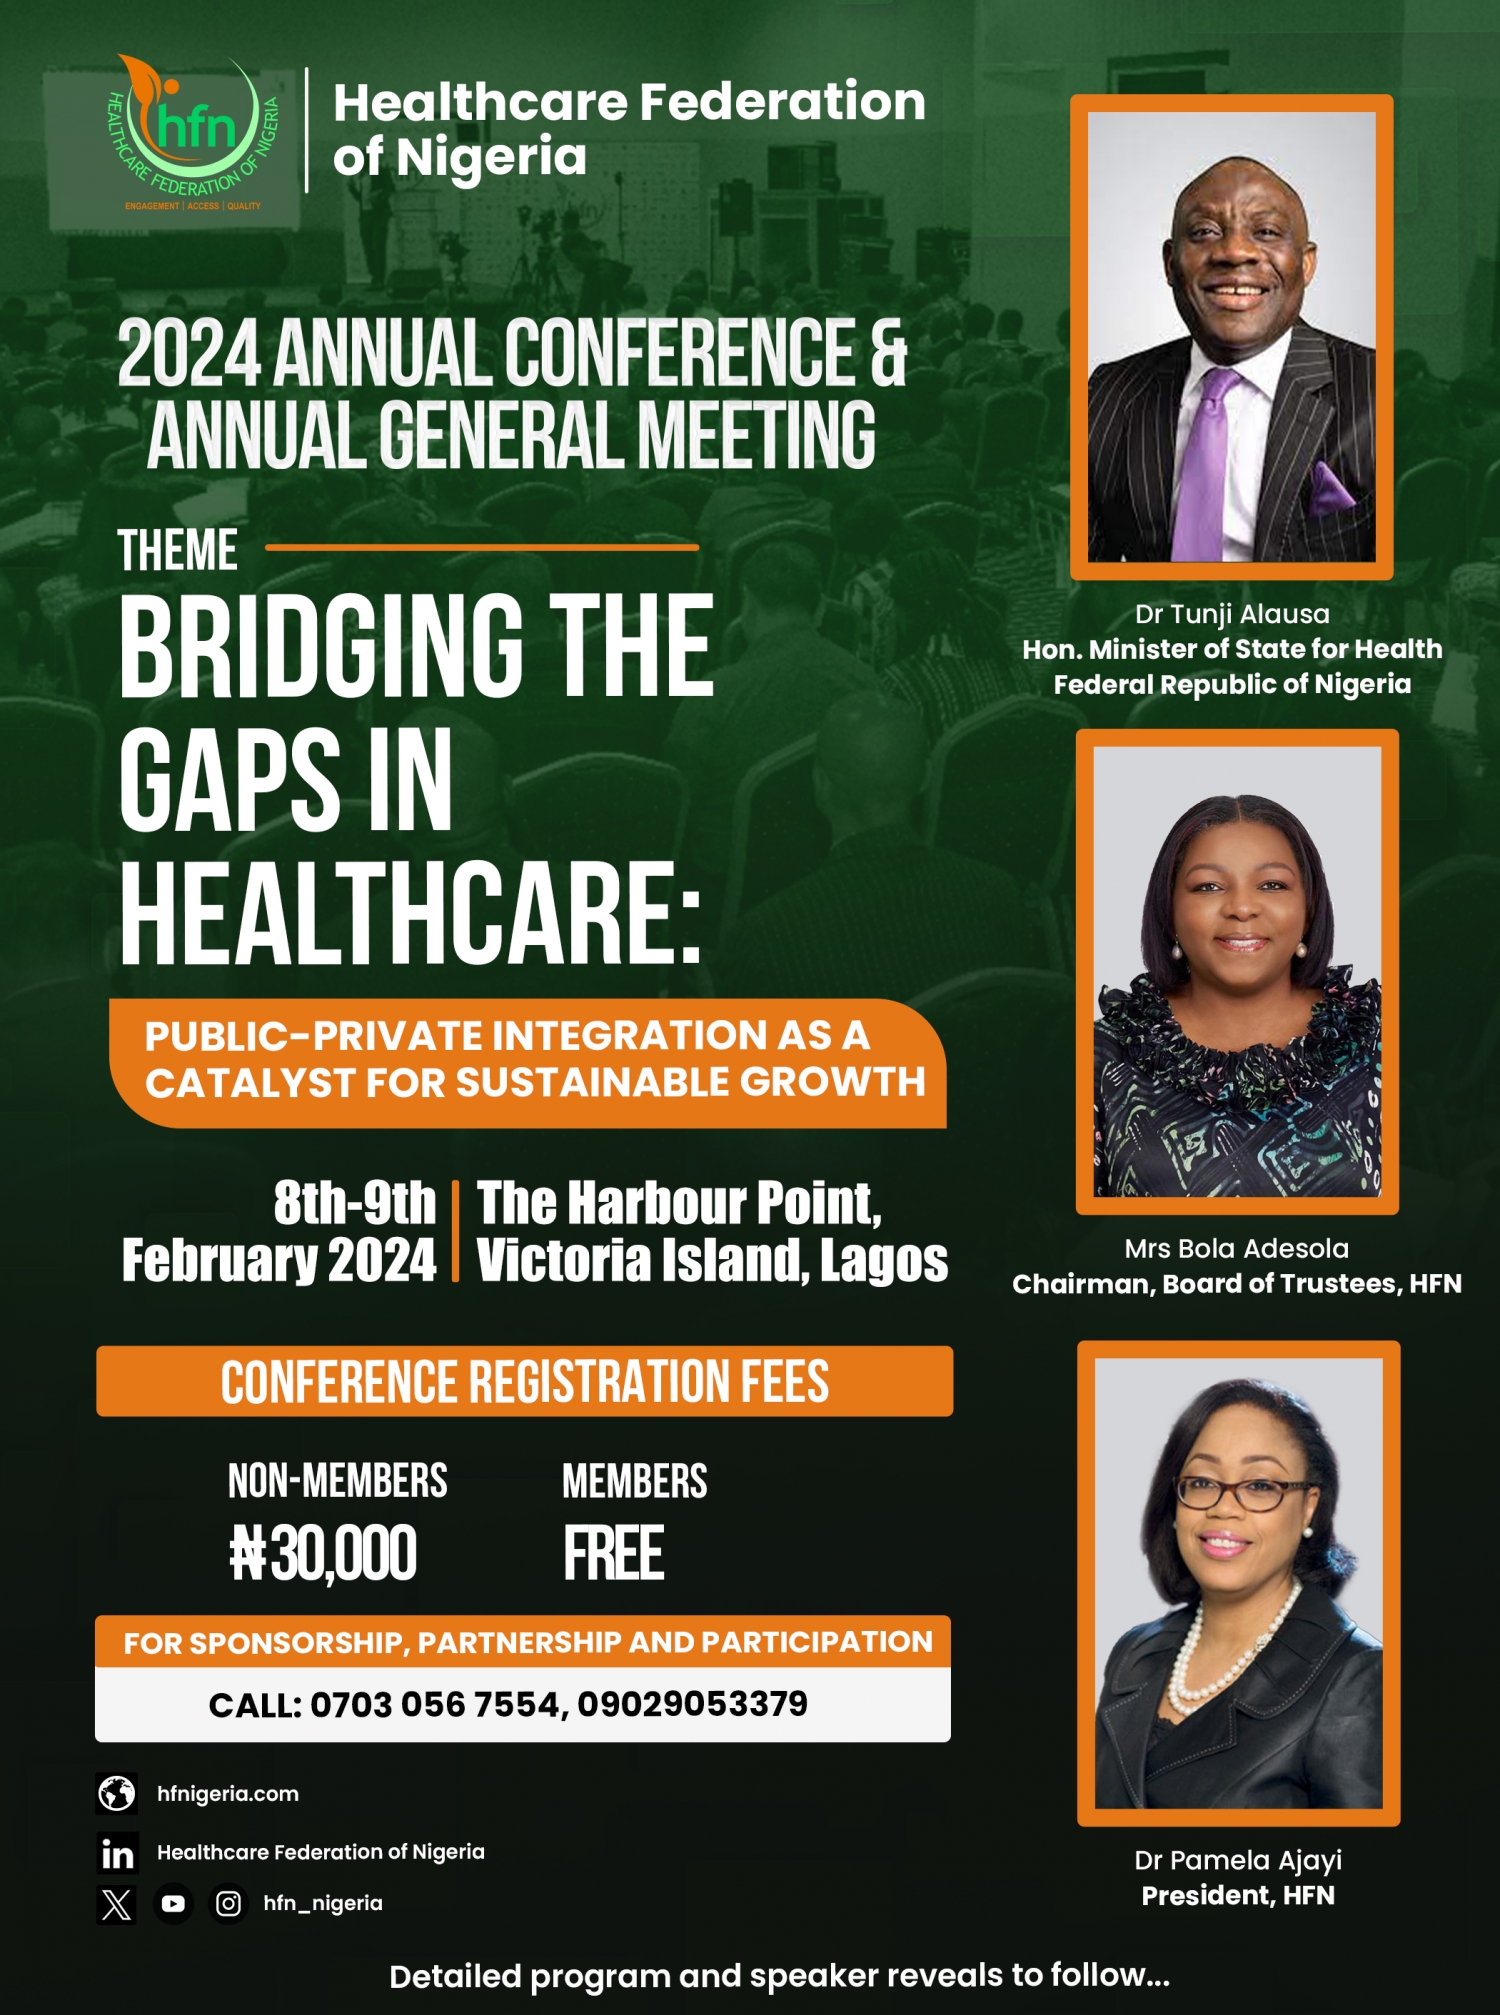 Healthcare Federation of Nigeria Gears Up for Premier Annual Conference